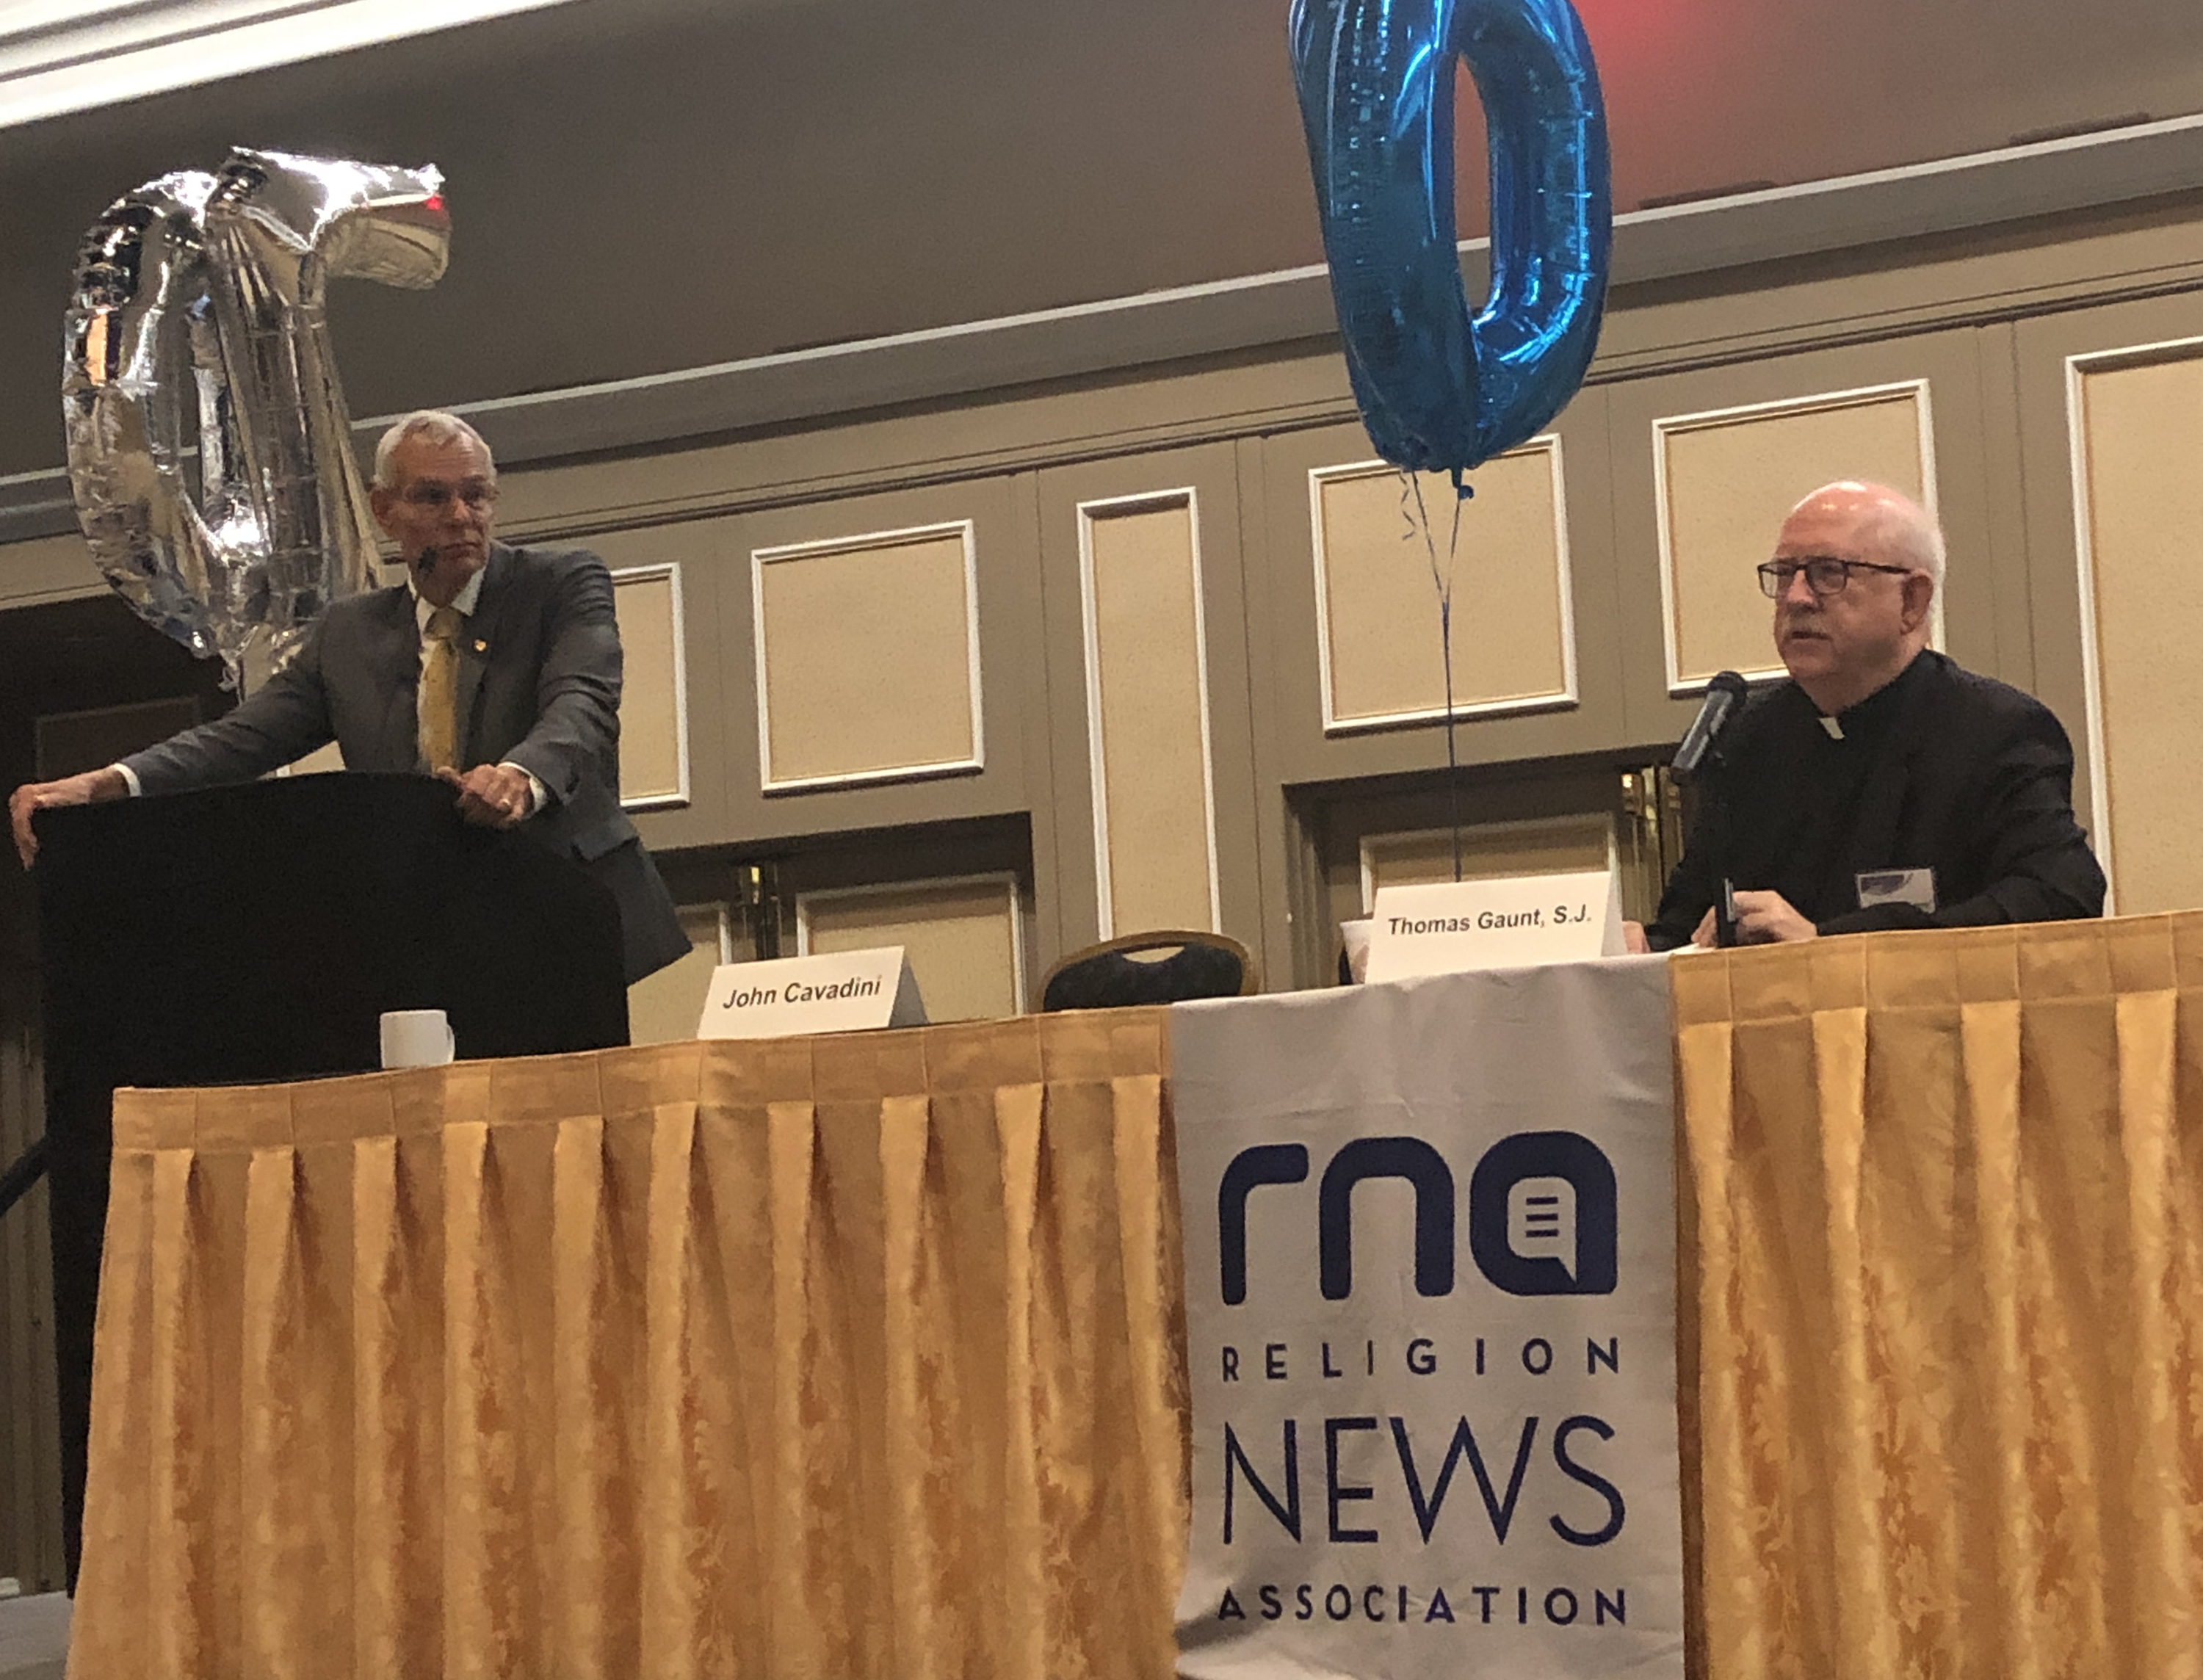 University of Notre Dame professor John Cavadini and Jesuit Father Thomas Gaunt of the Center for Applied Research in the Apostolate took questions from the audience Sept. 21, 2019, during the Religion News Association conference in Las Vegas. They presented findings of their groundbreaking study on sexual harassment in seminaries in the U.S